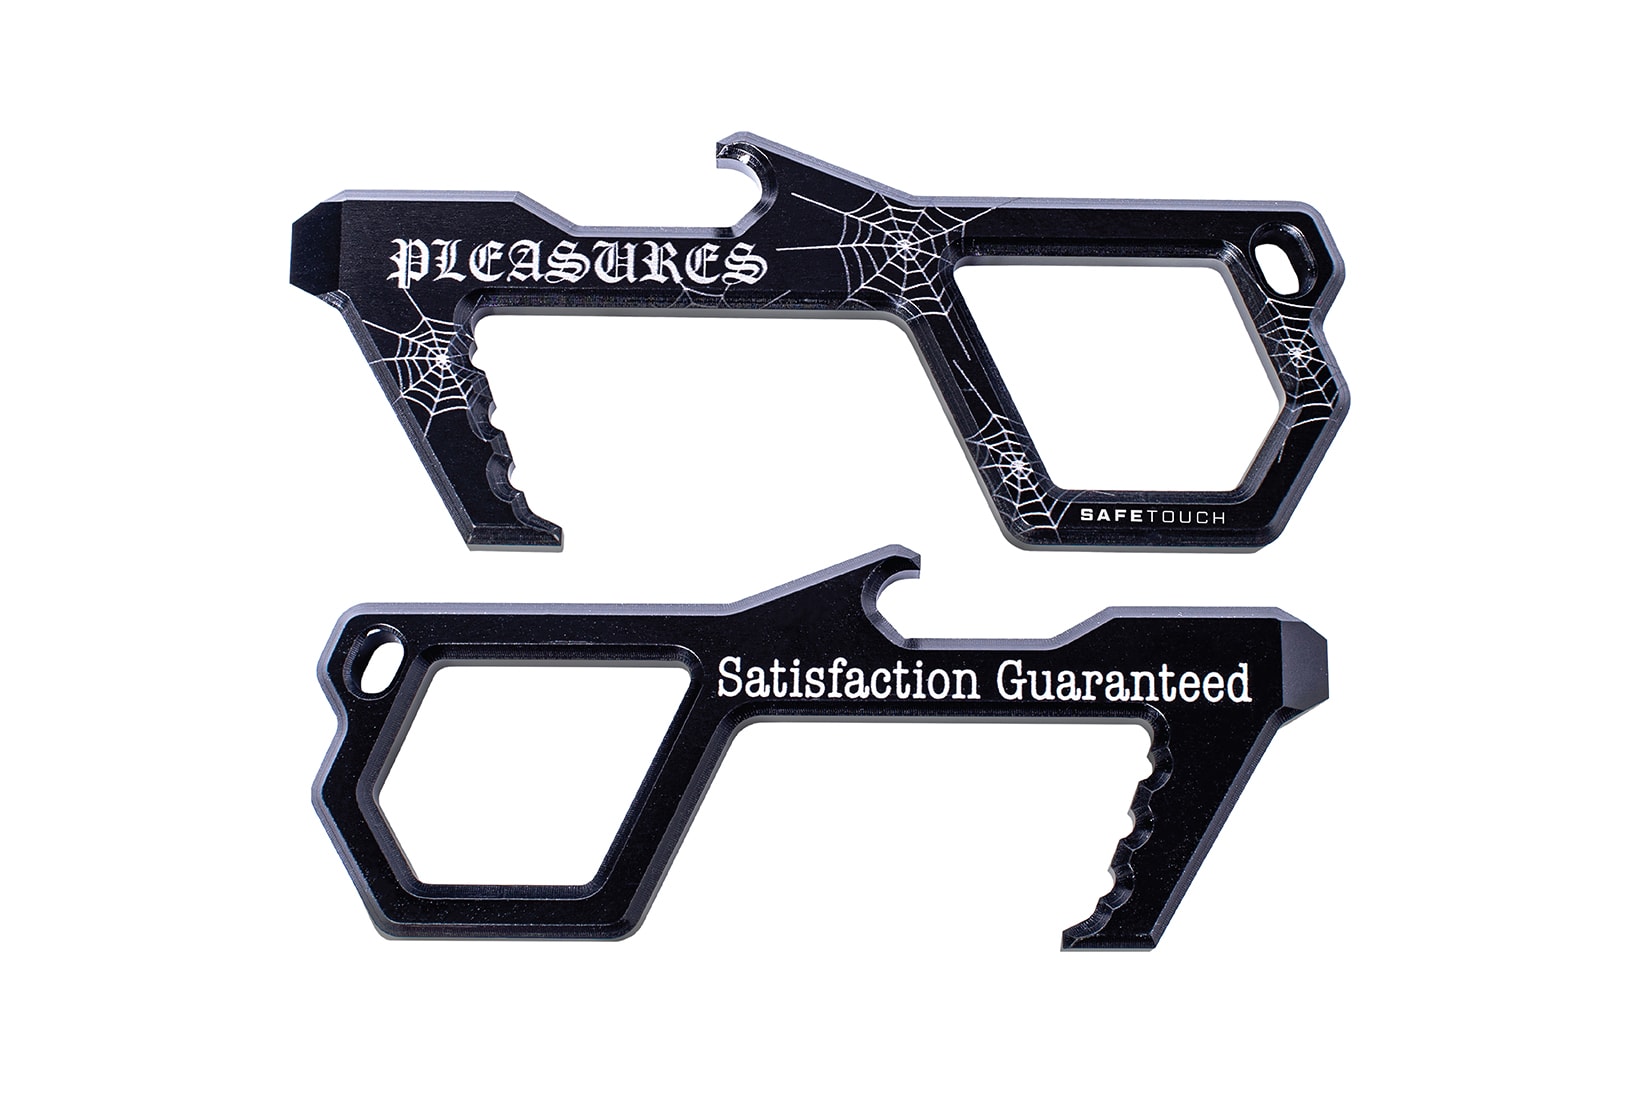 PLEASURES x SafeTouch Hygiene Multi-Tool Hands-Free Touch